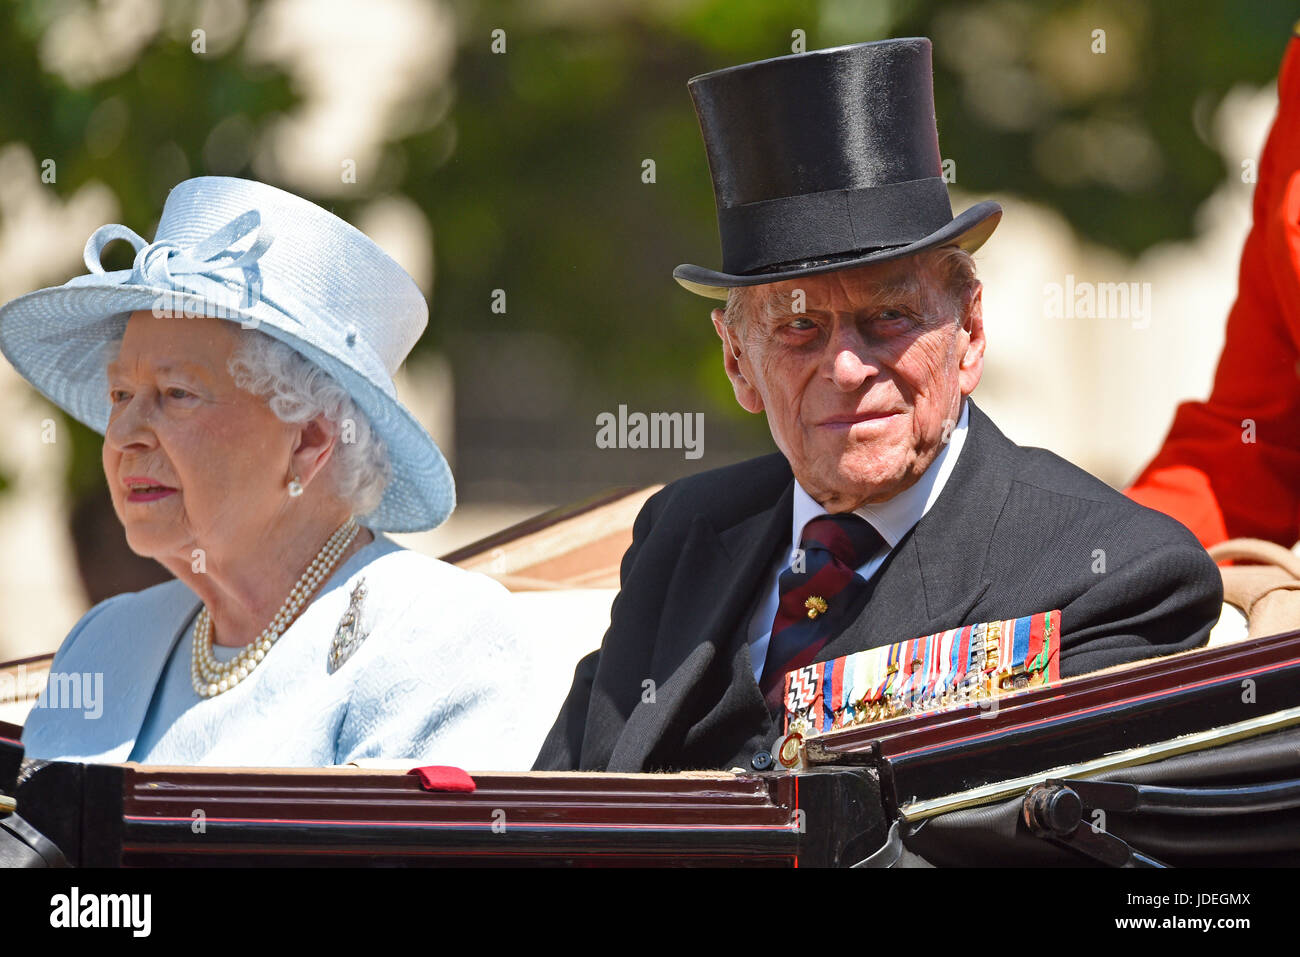 The Queen and Prince Philip in a carriage during Trooping the Colour 2017, The Mall, London. Duke of Edinburgh looking old, wearing black suit, medals Stock Photo